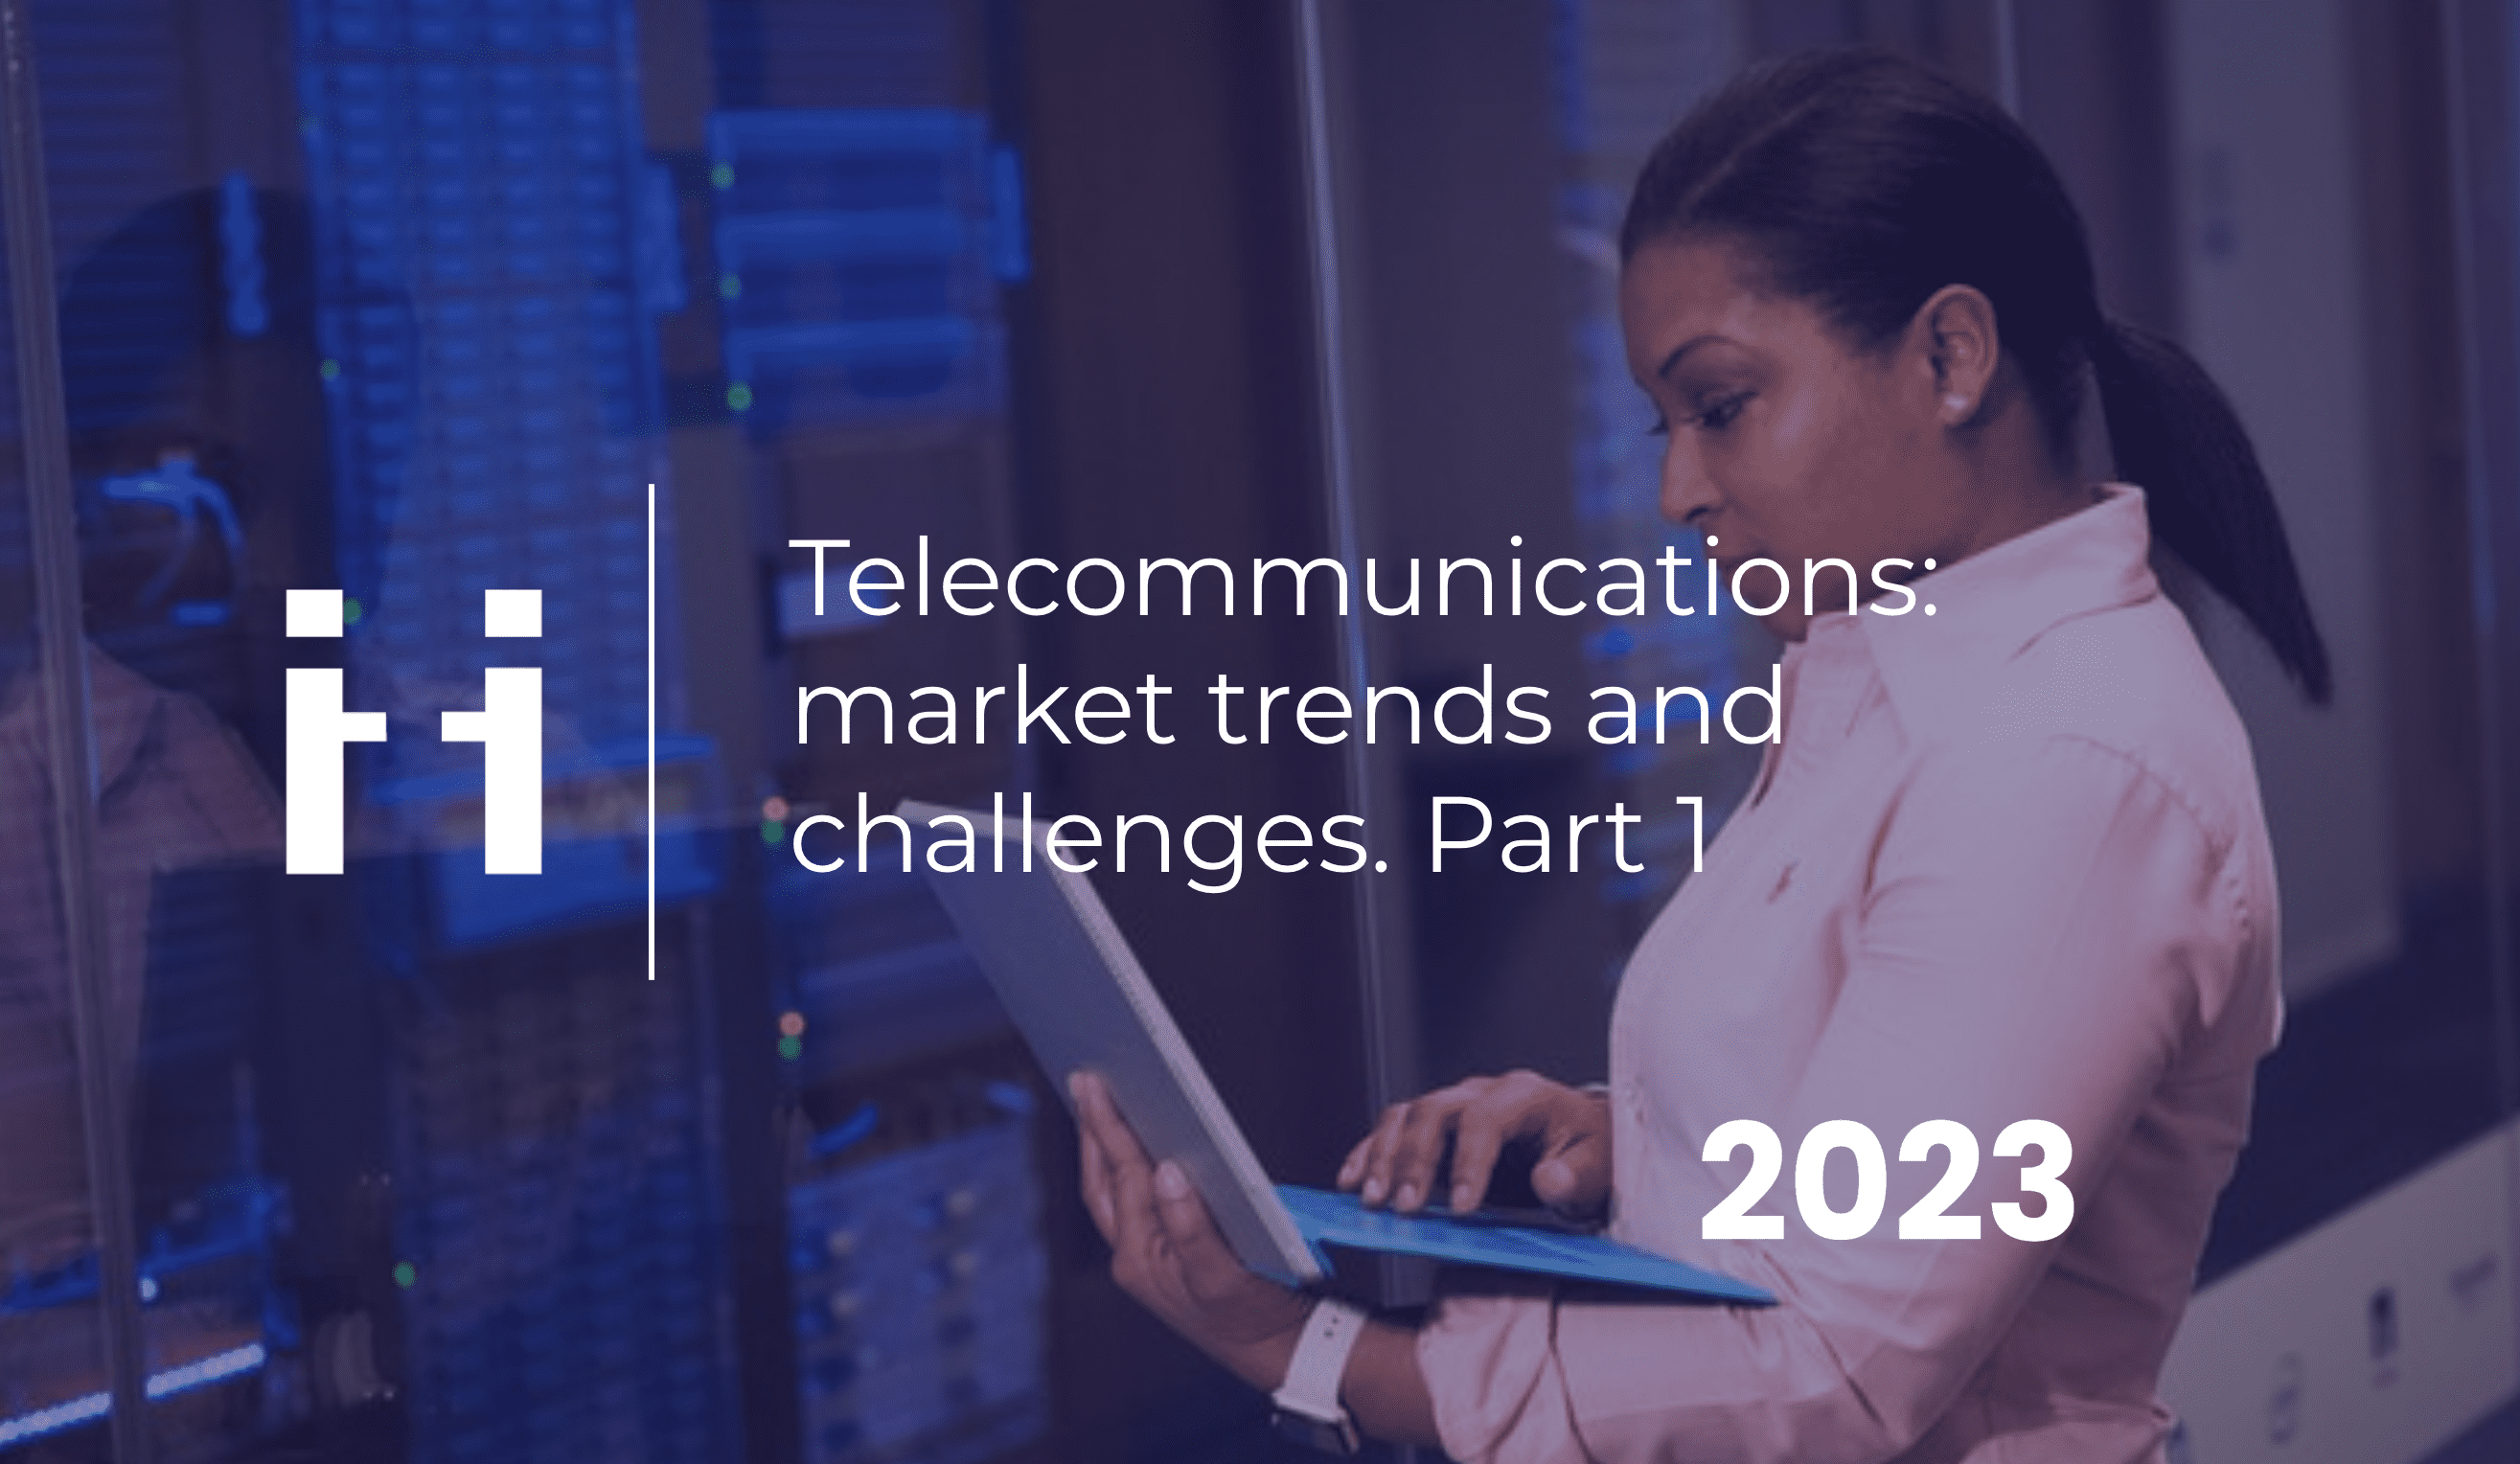 trends and challenges of telecommunication market